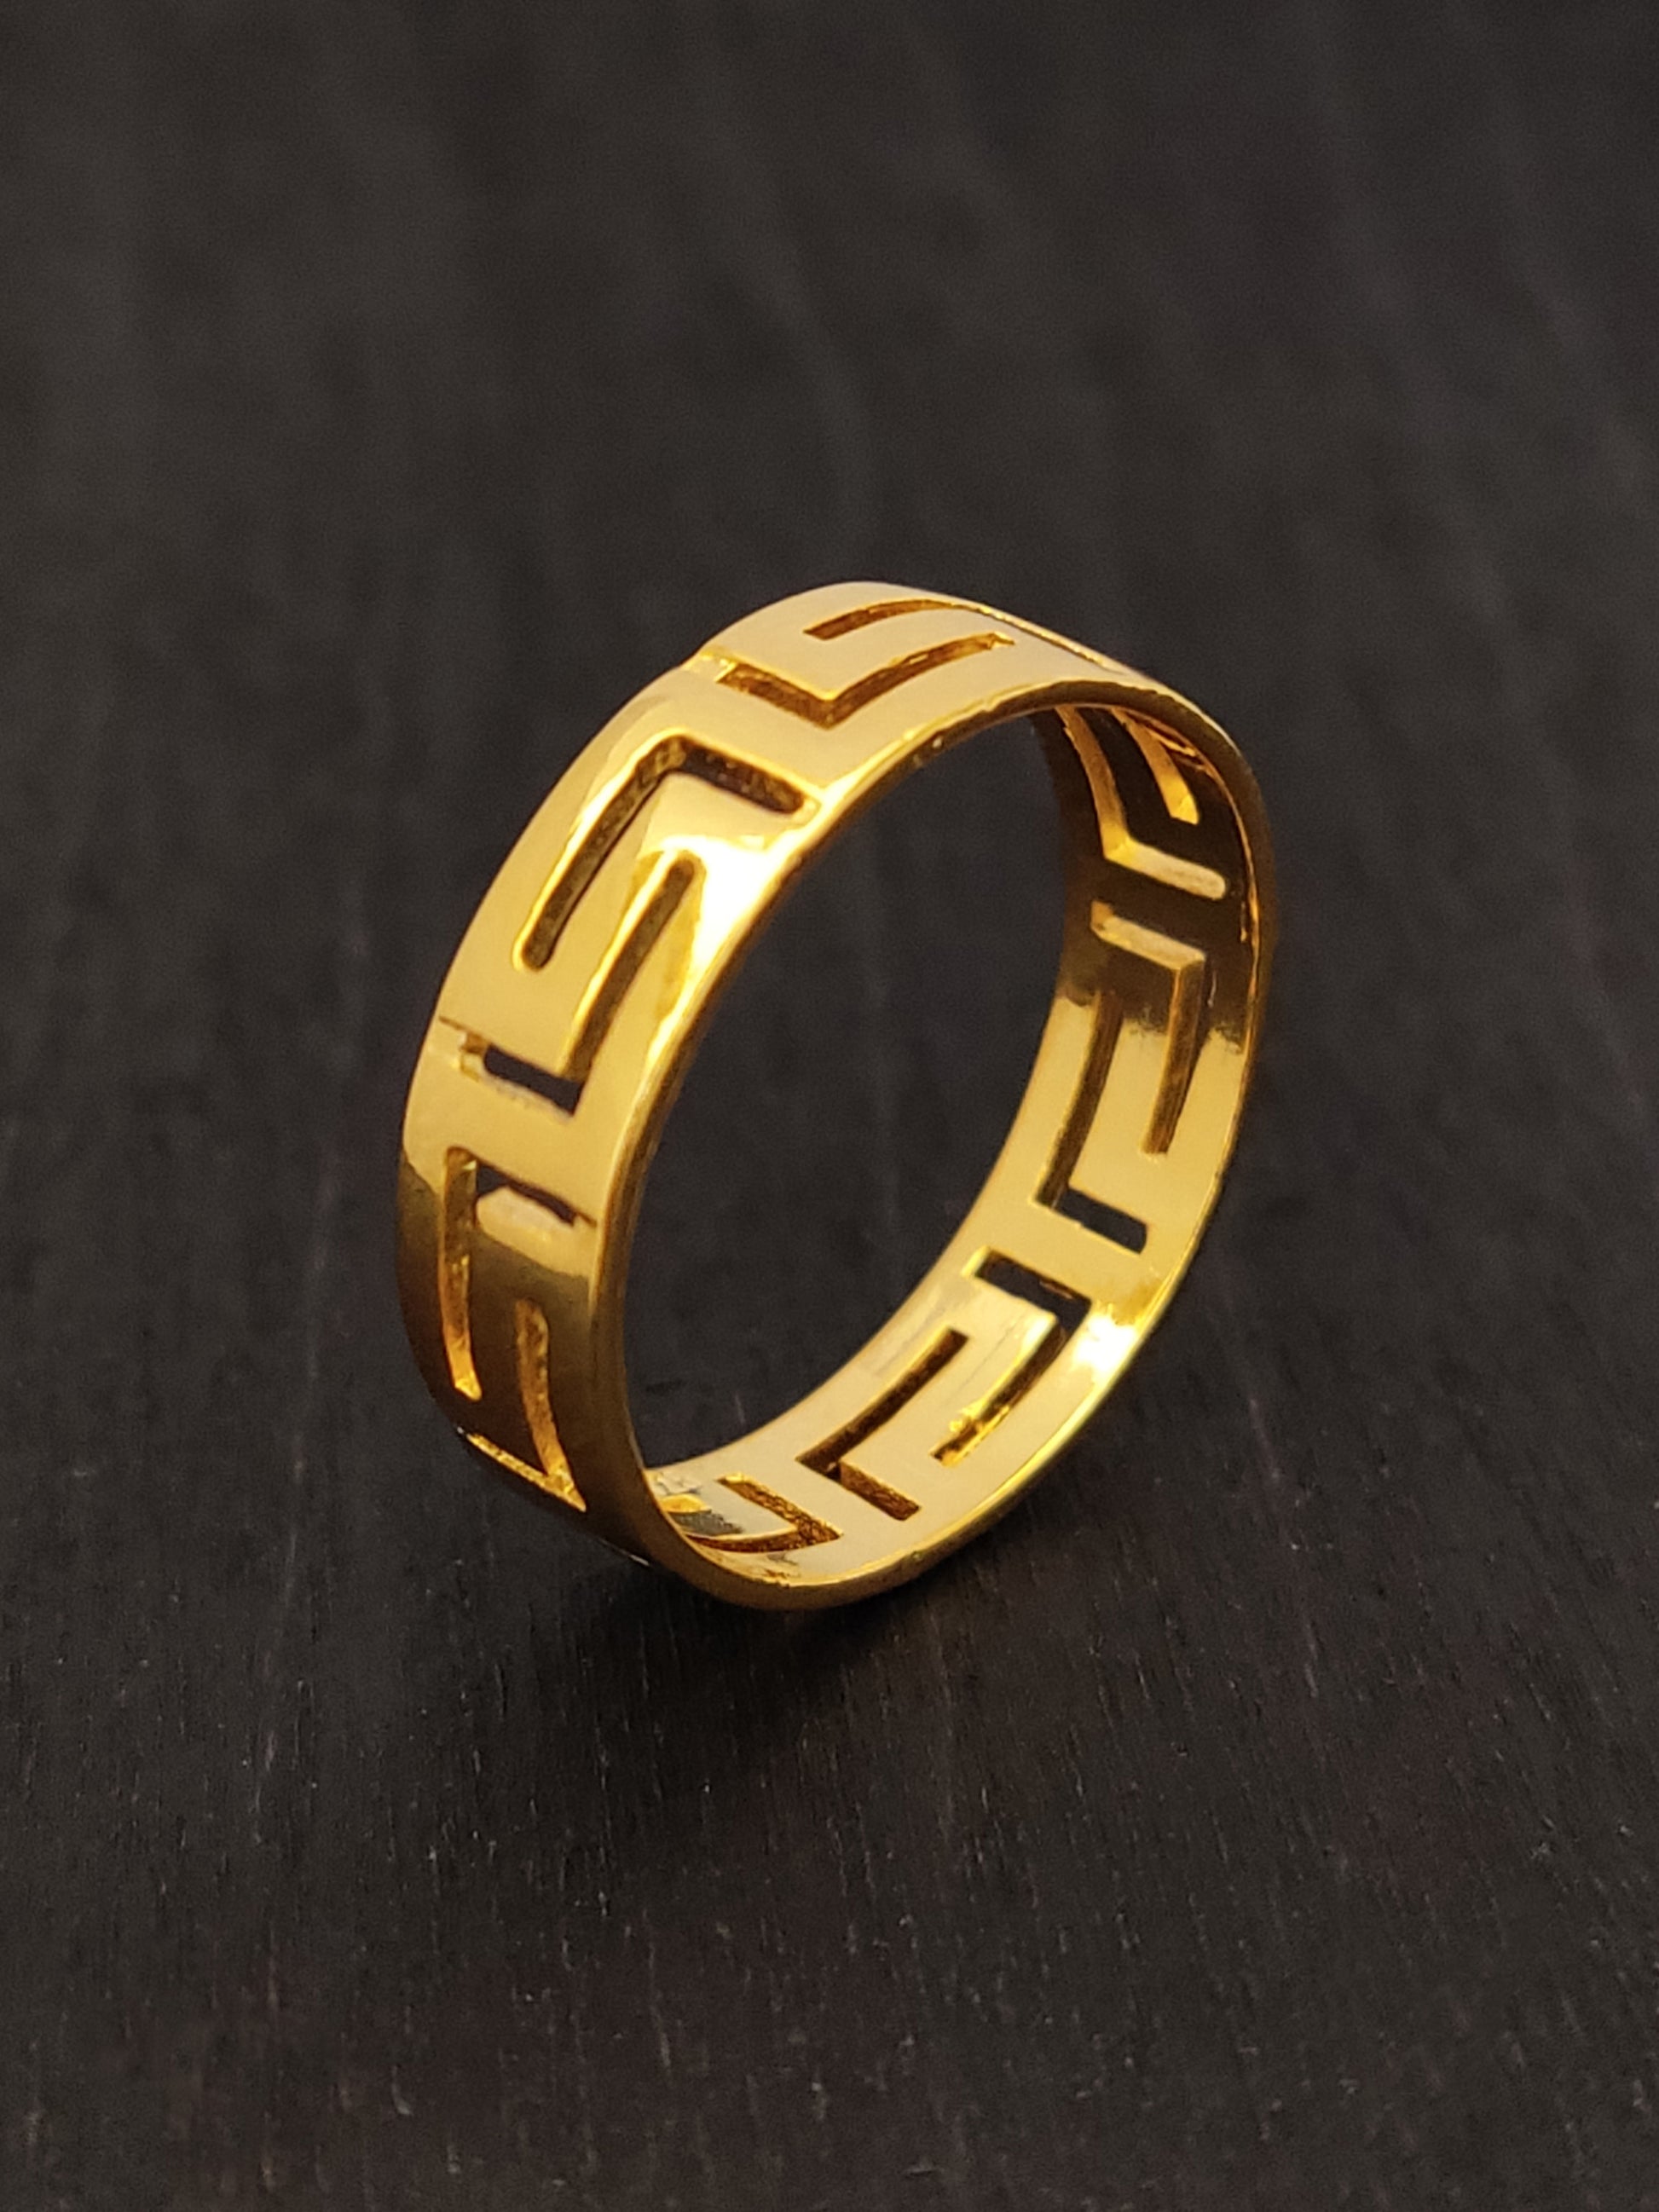 Greek key silver ring with gold plated finish measuring 5mm width on black background.